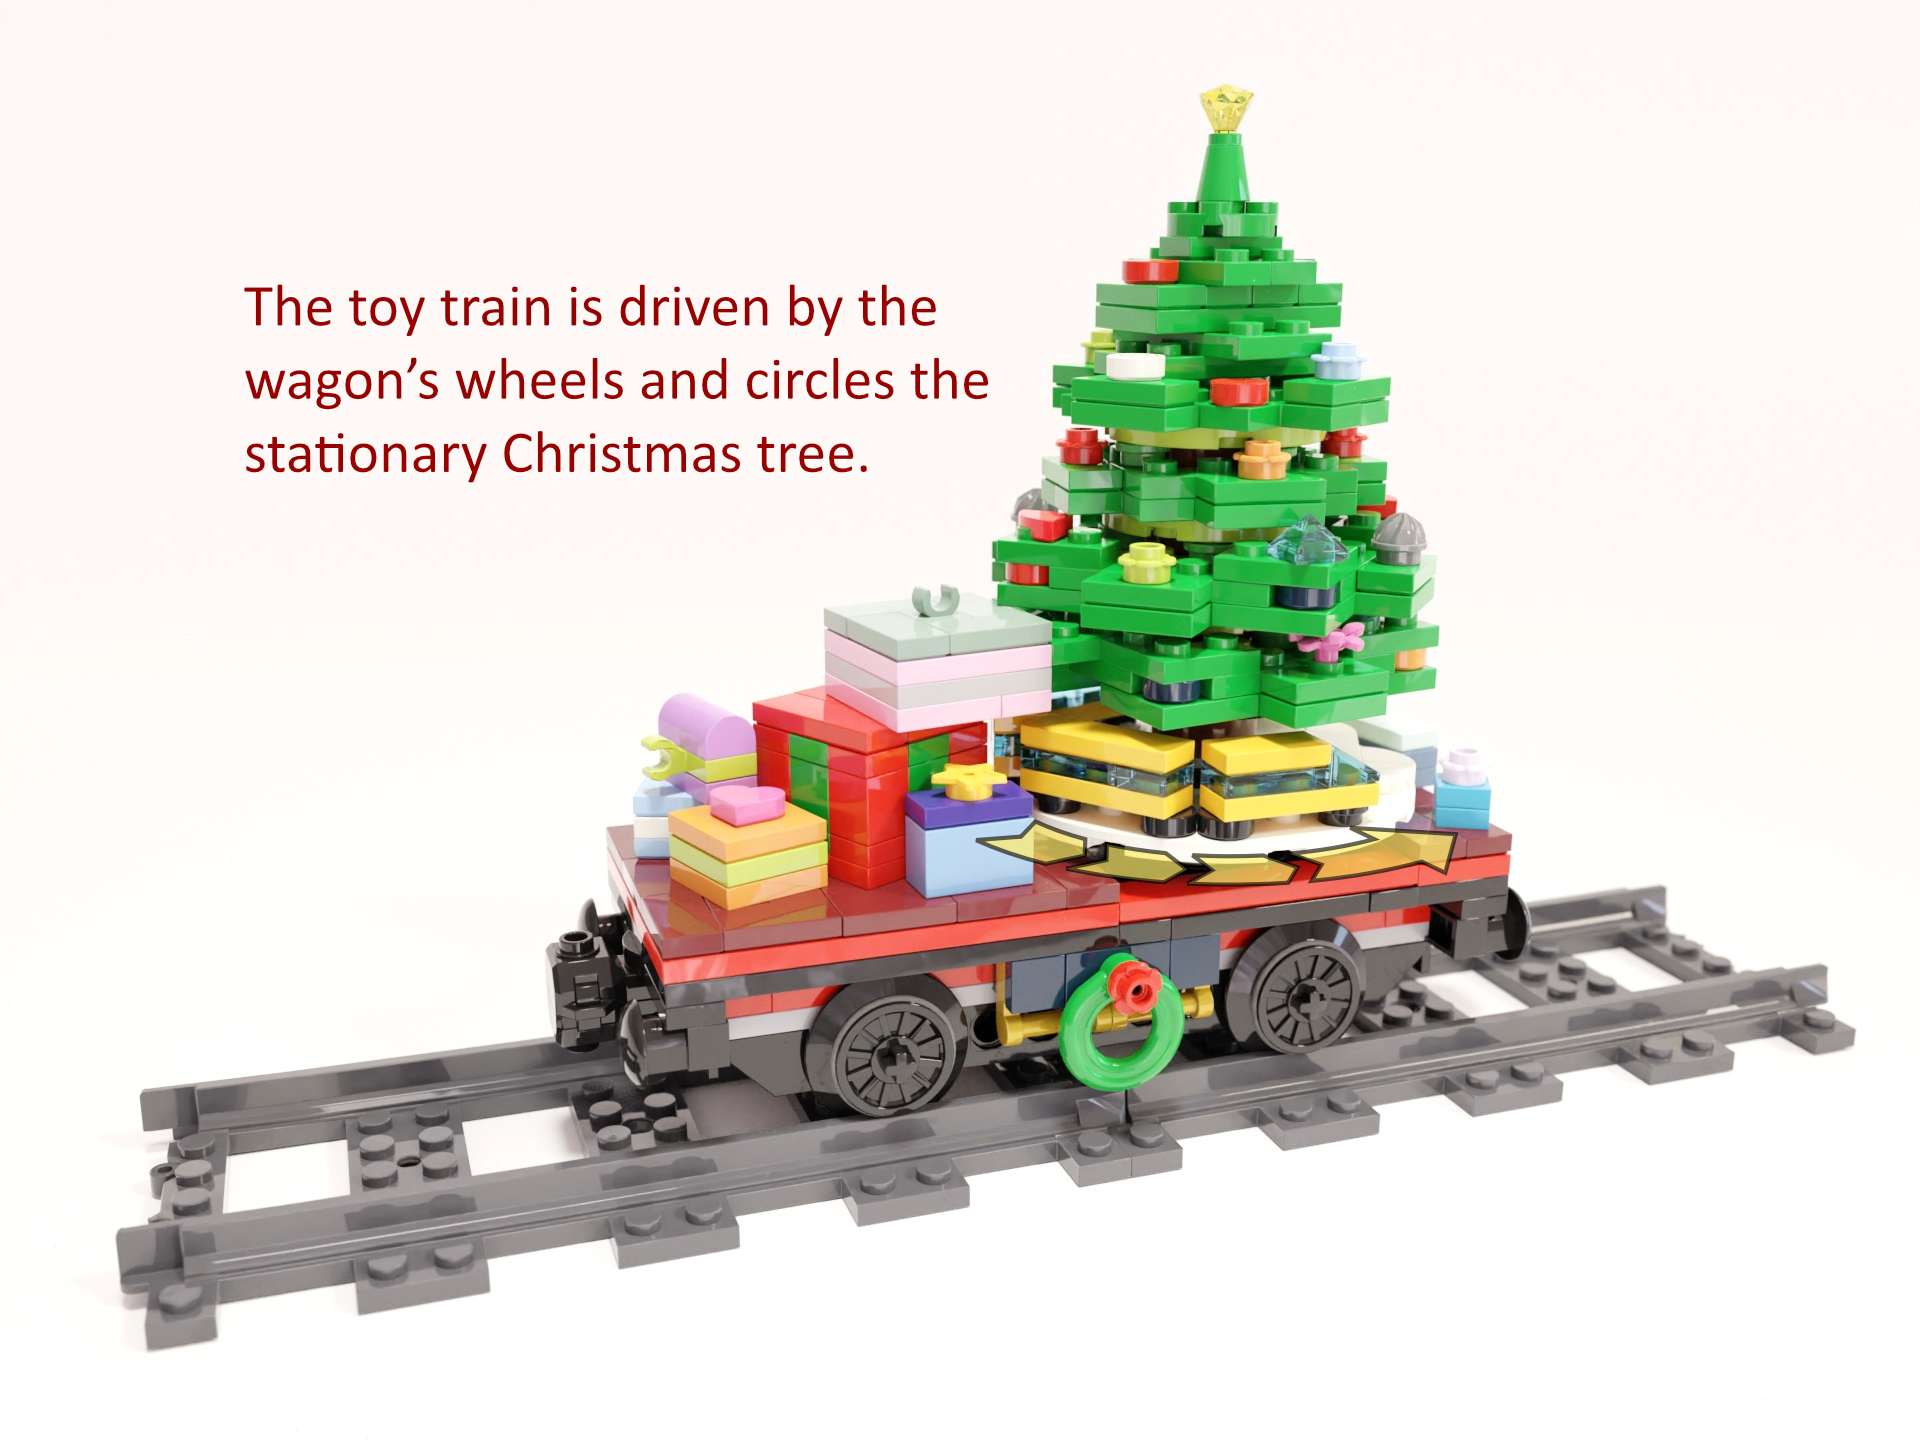 Picture 3: The toy train is driven by the wagon's wheels and circles the stationary Christmas tree.